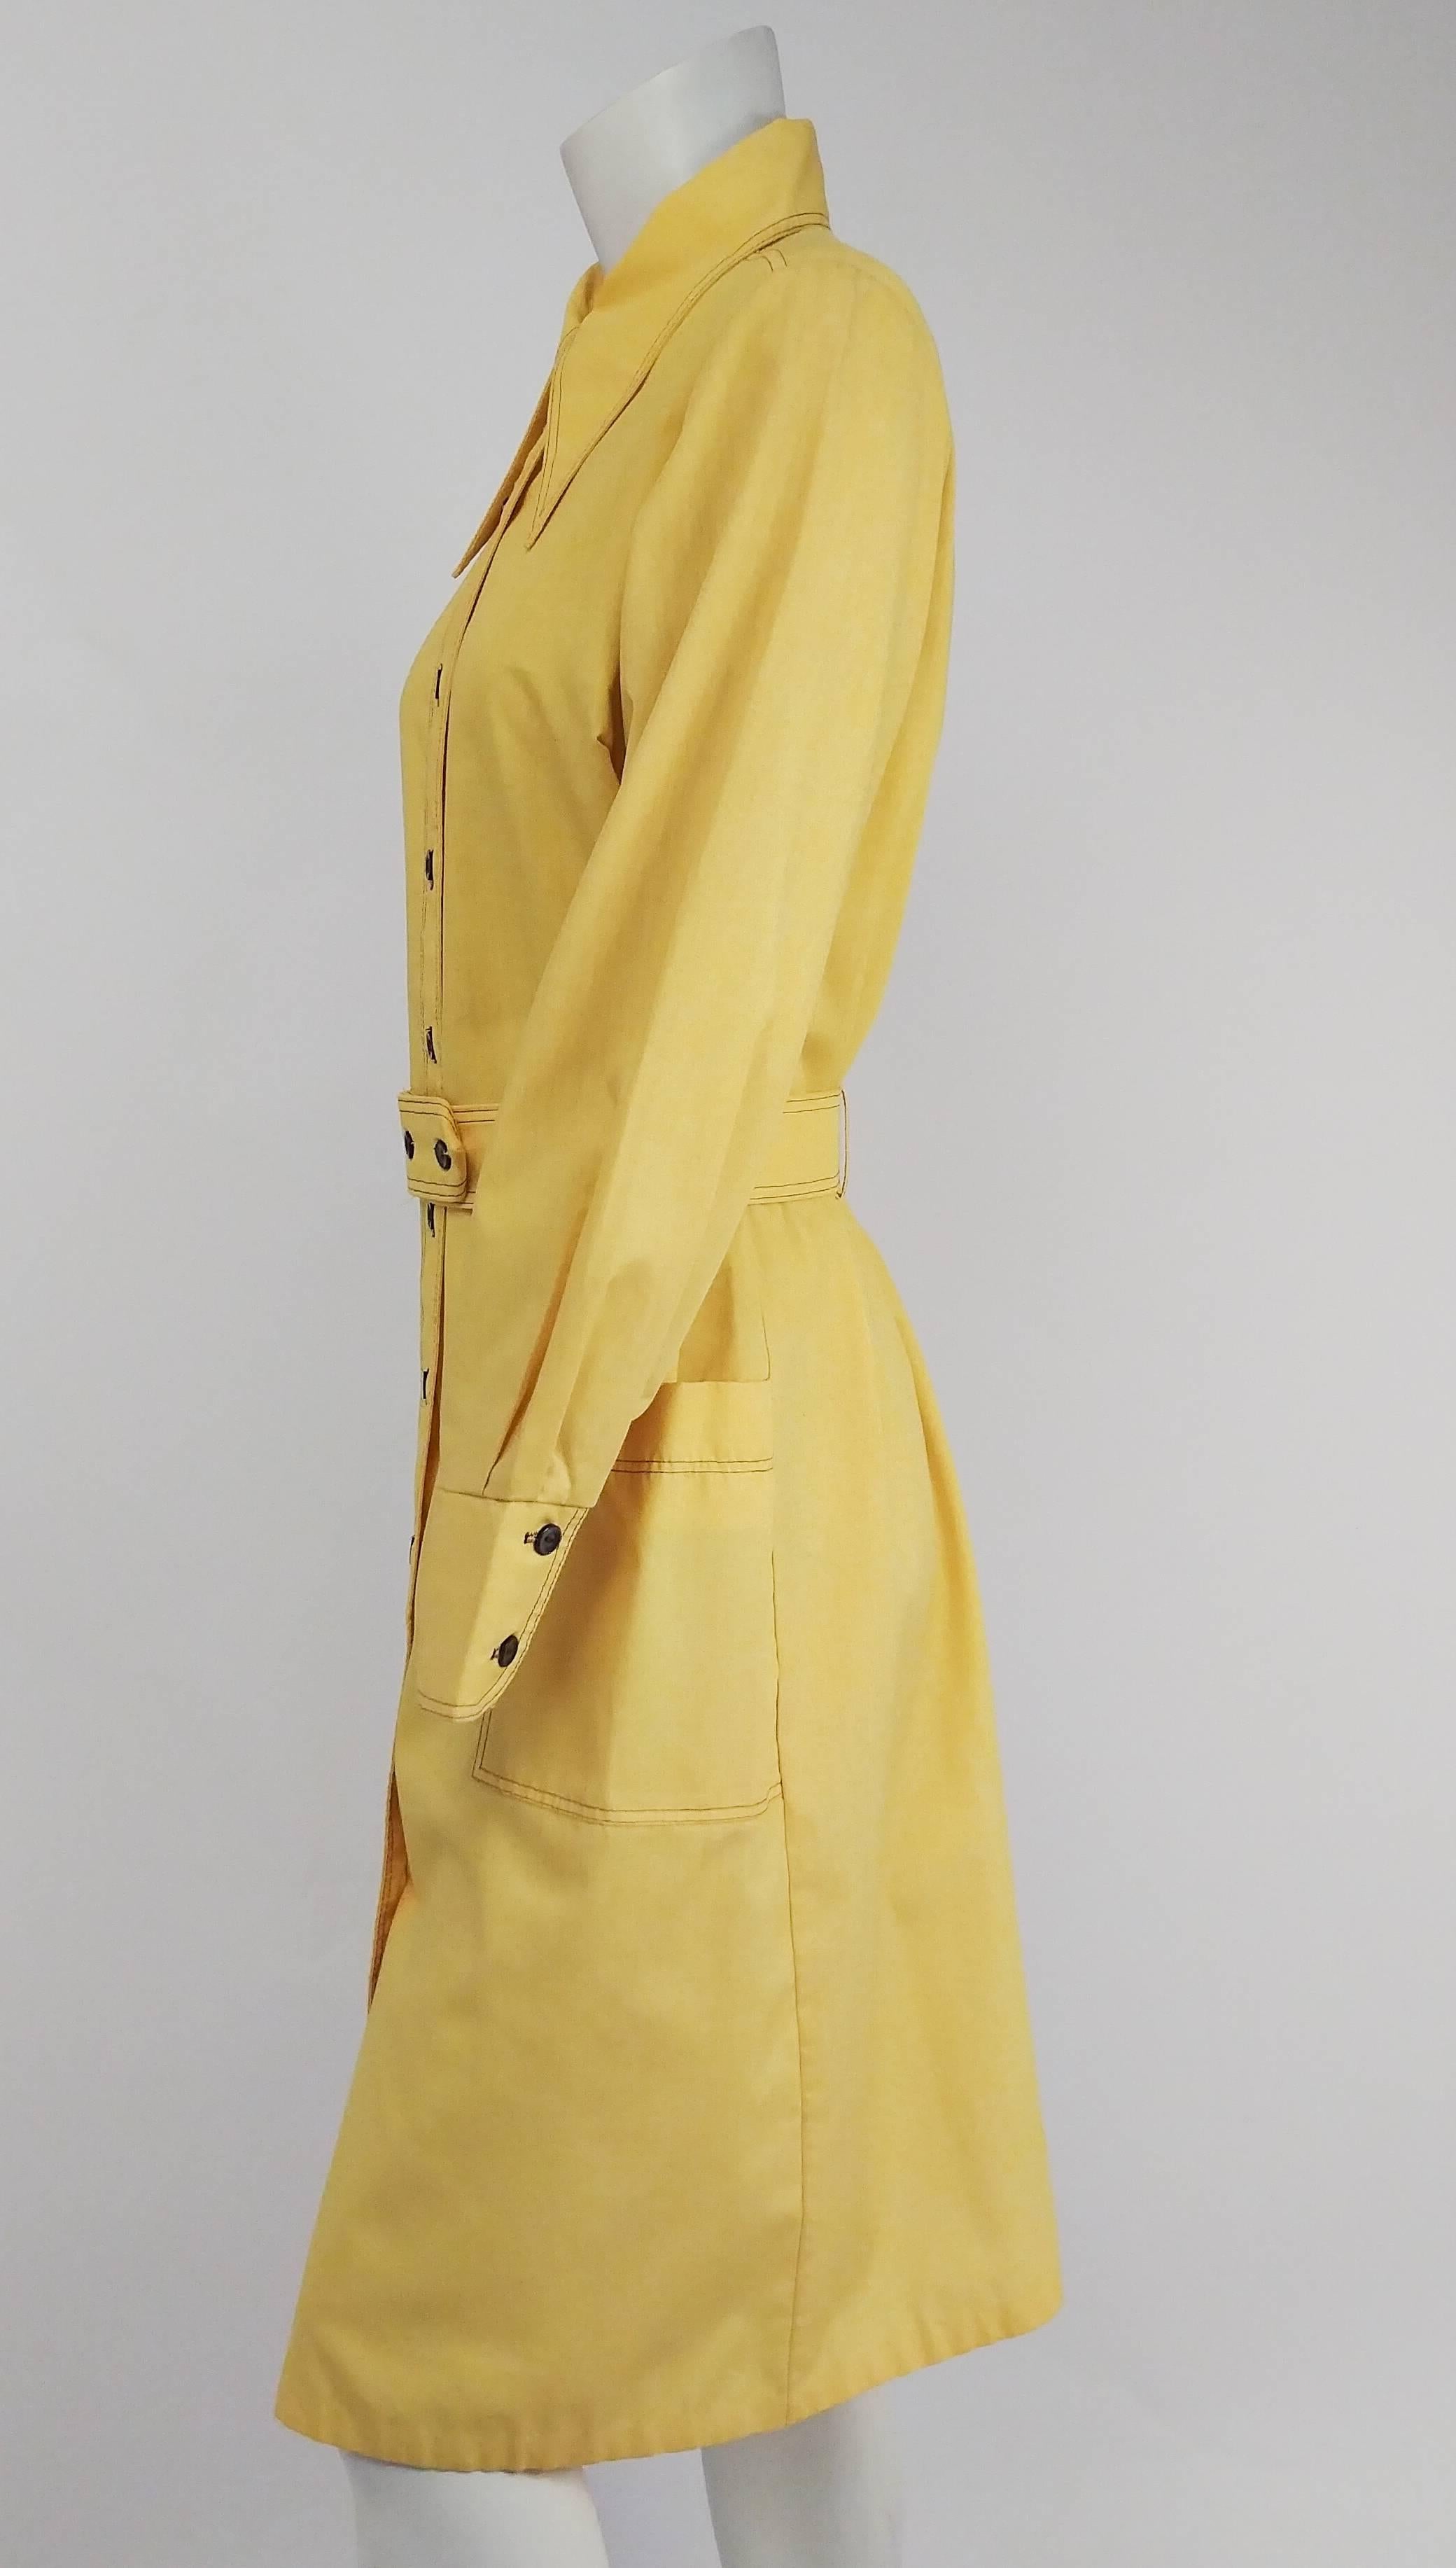 1970s Yellow Cotton Shirtdress. Matching belt included. Contrast topstitching. Two front pockets. Buttons up front. 